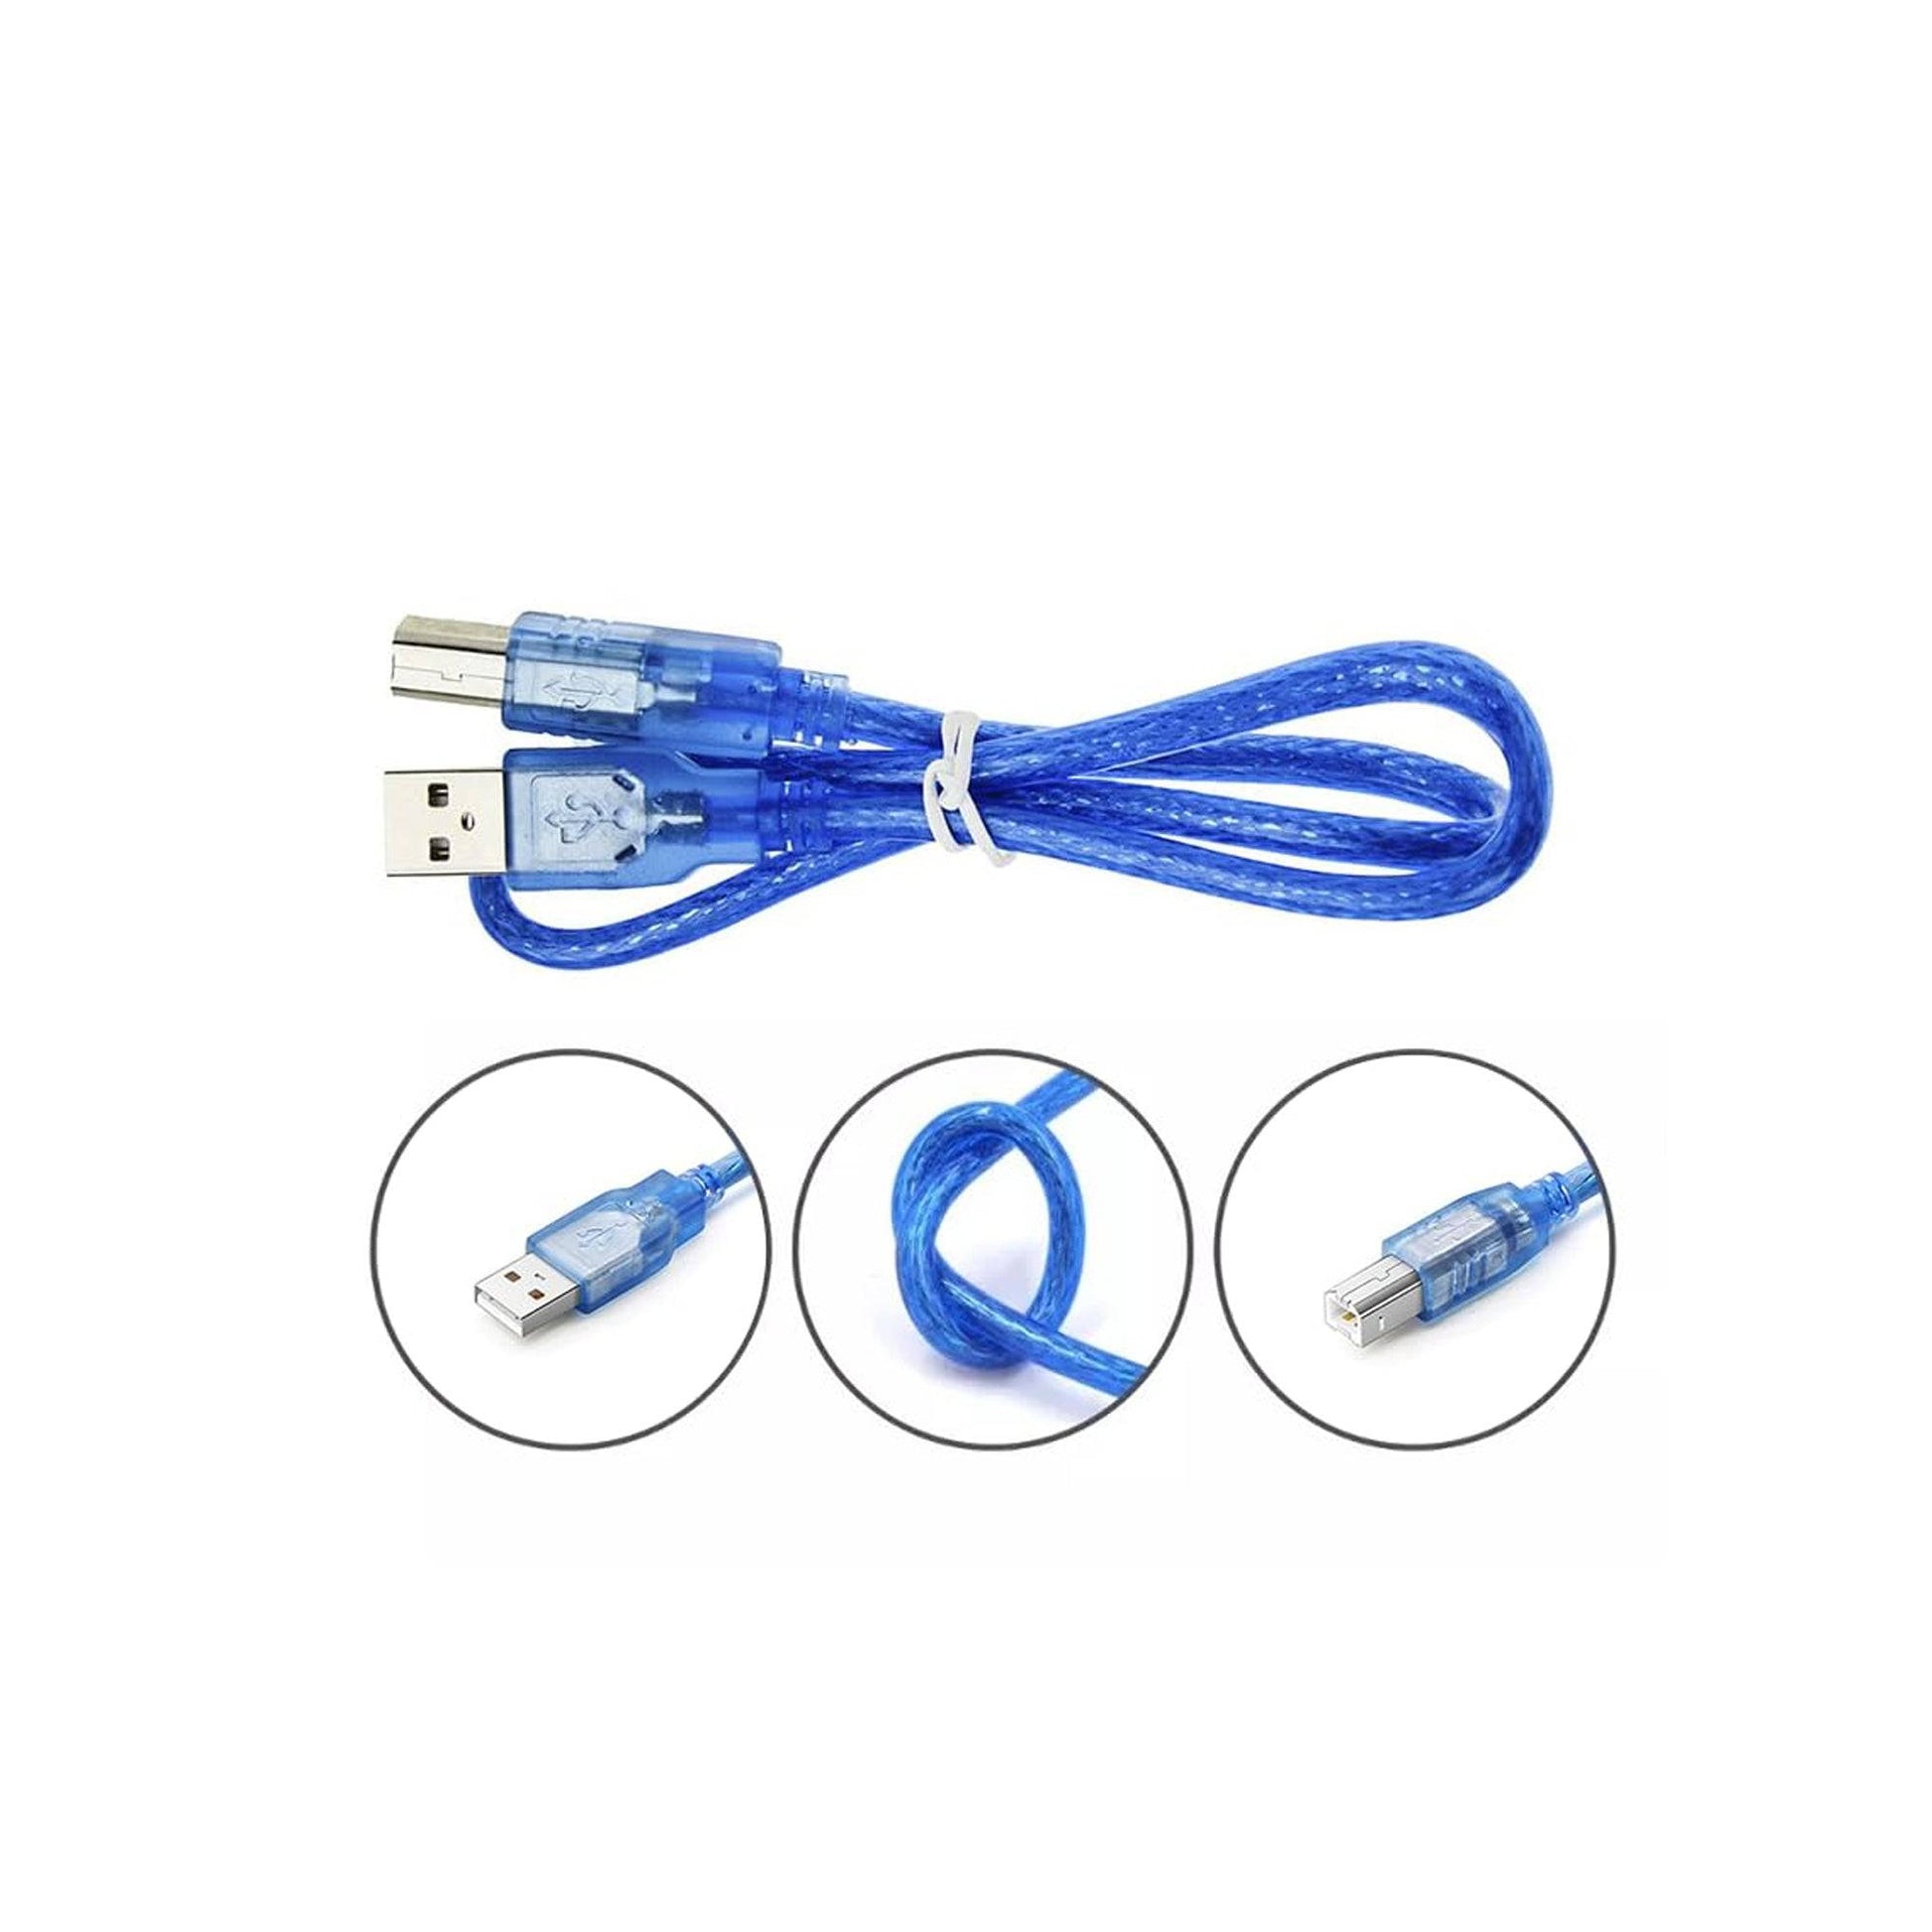 USB Type A-B Cable for Arduino UNO/MEGA - 30cm